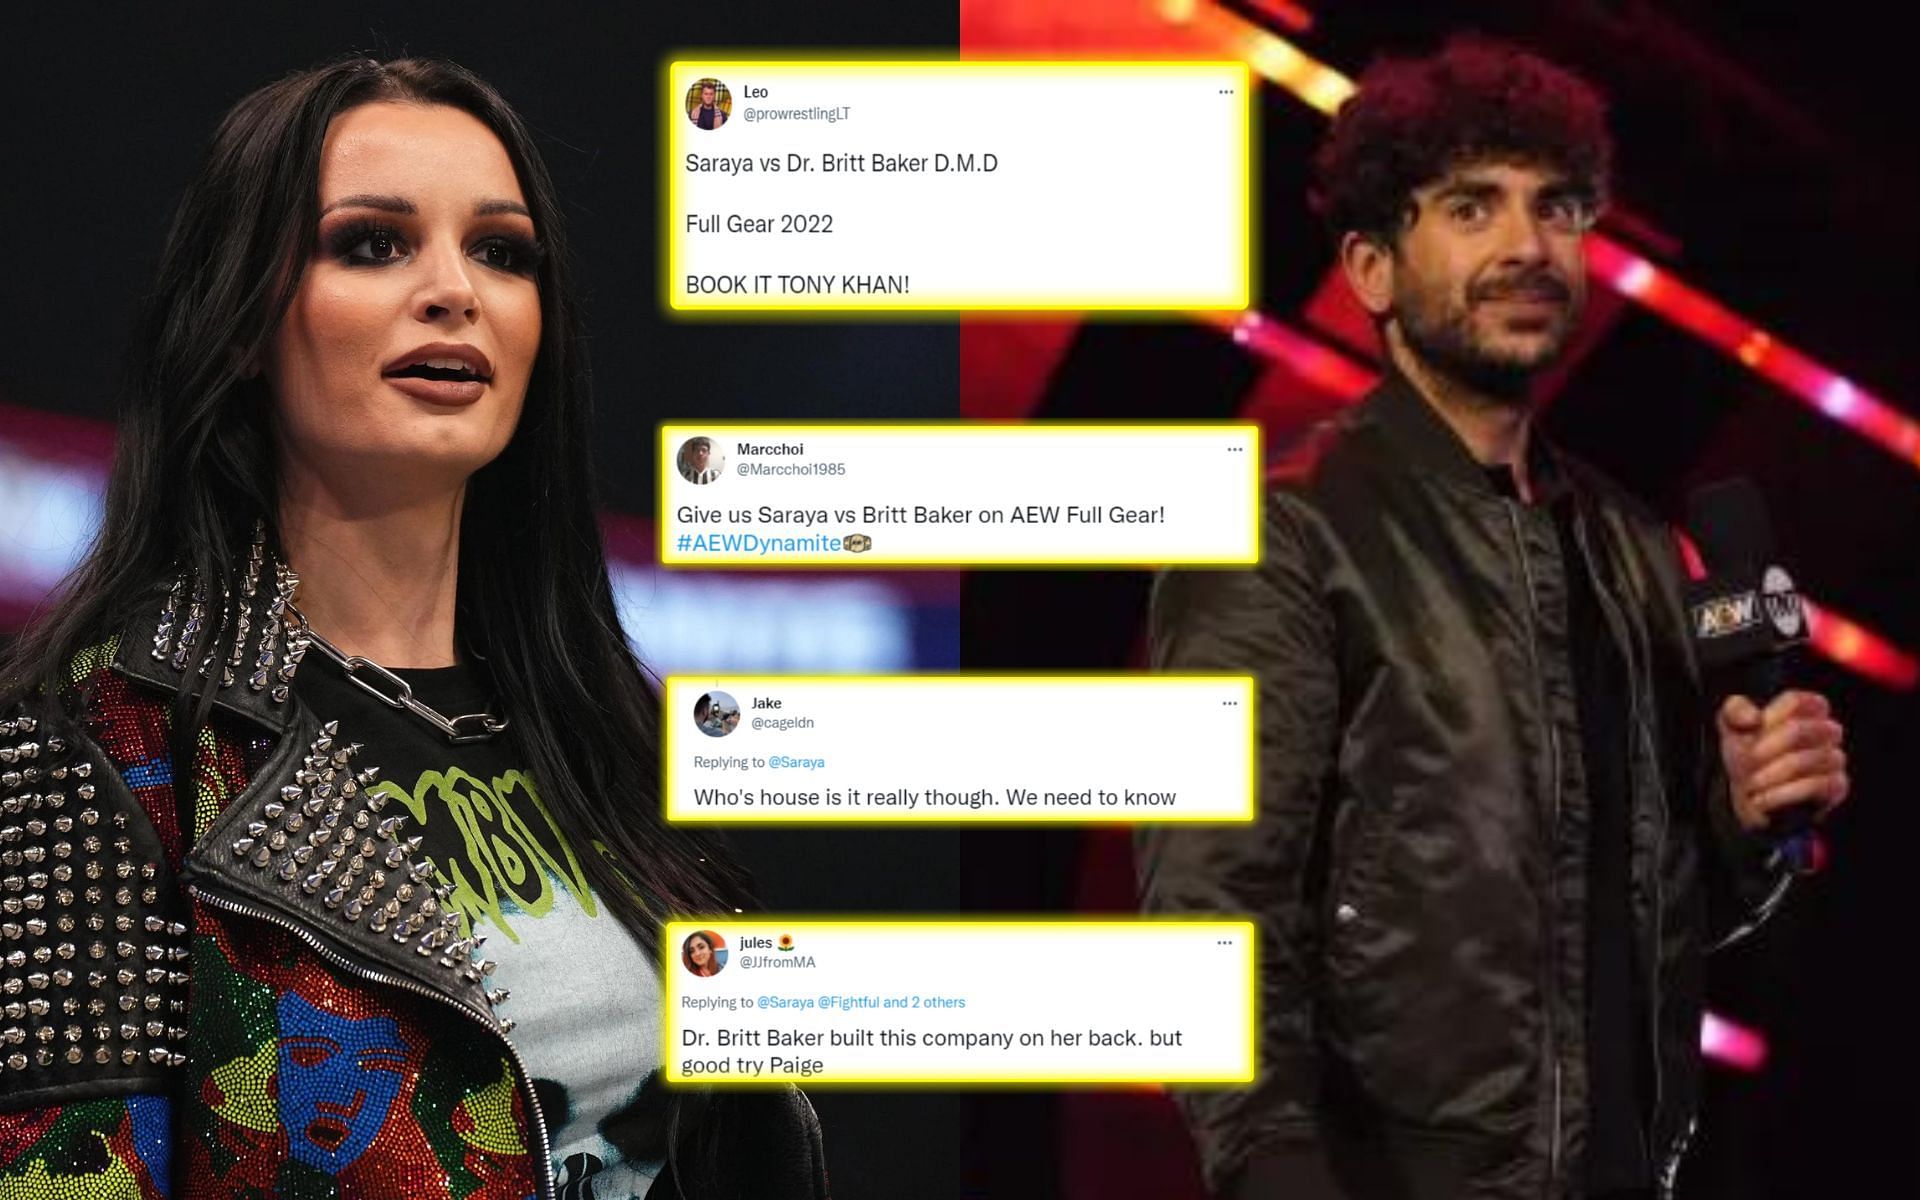 AEW fans wants to see Saraya in action